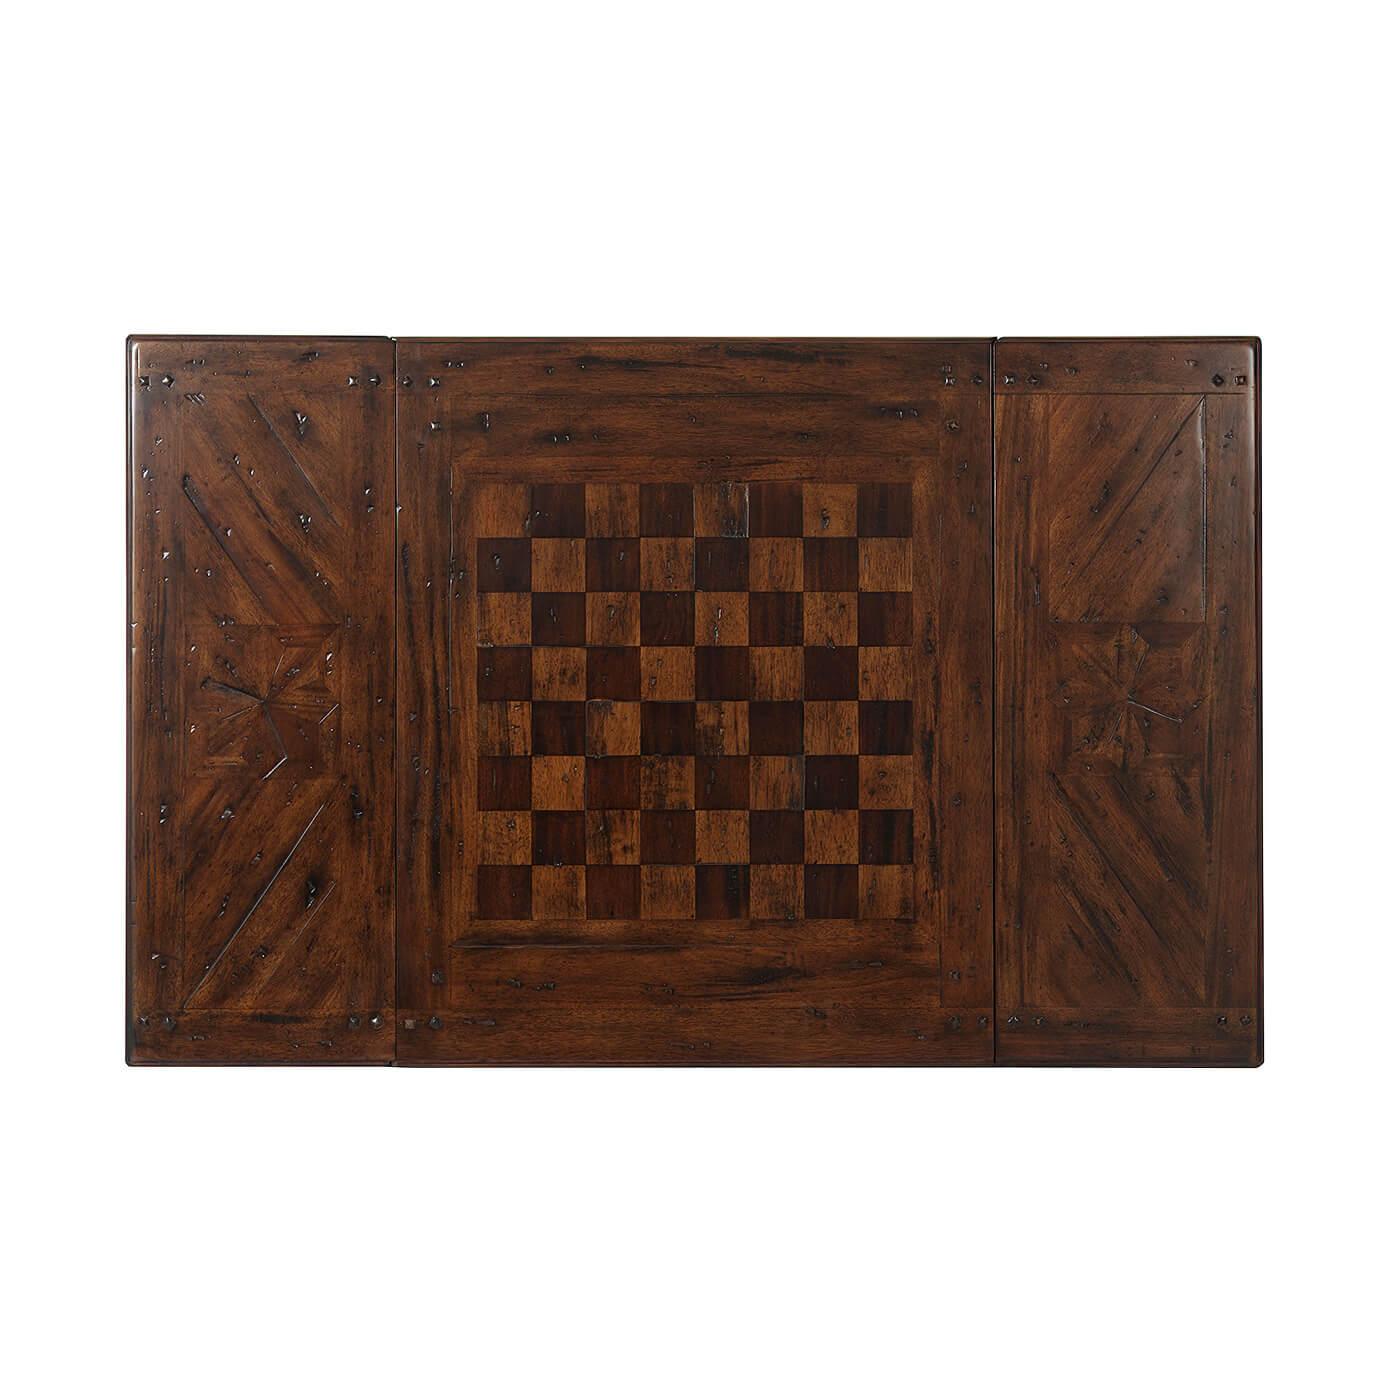 Wood English Country Games Table For Sale